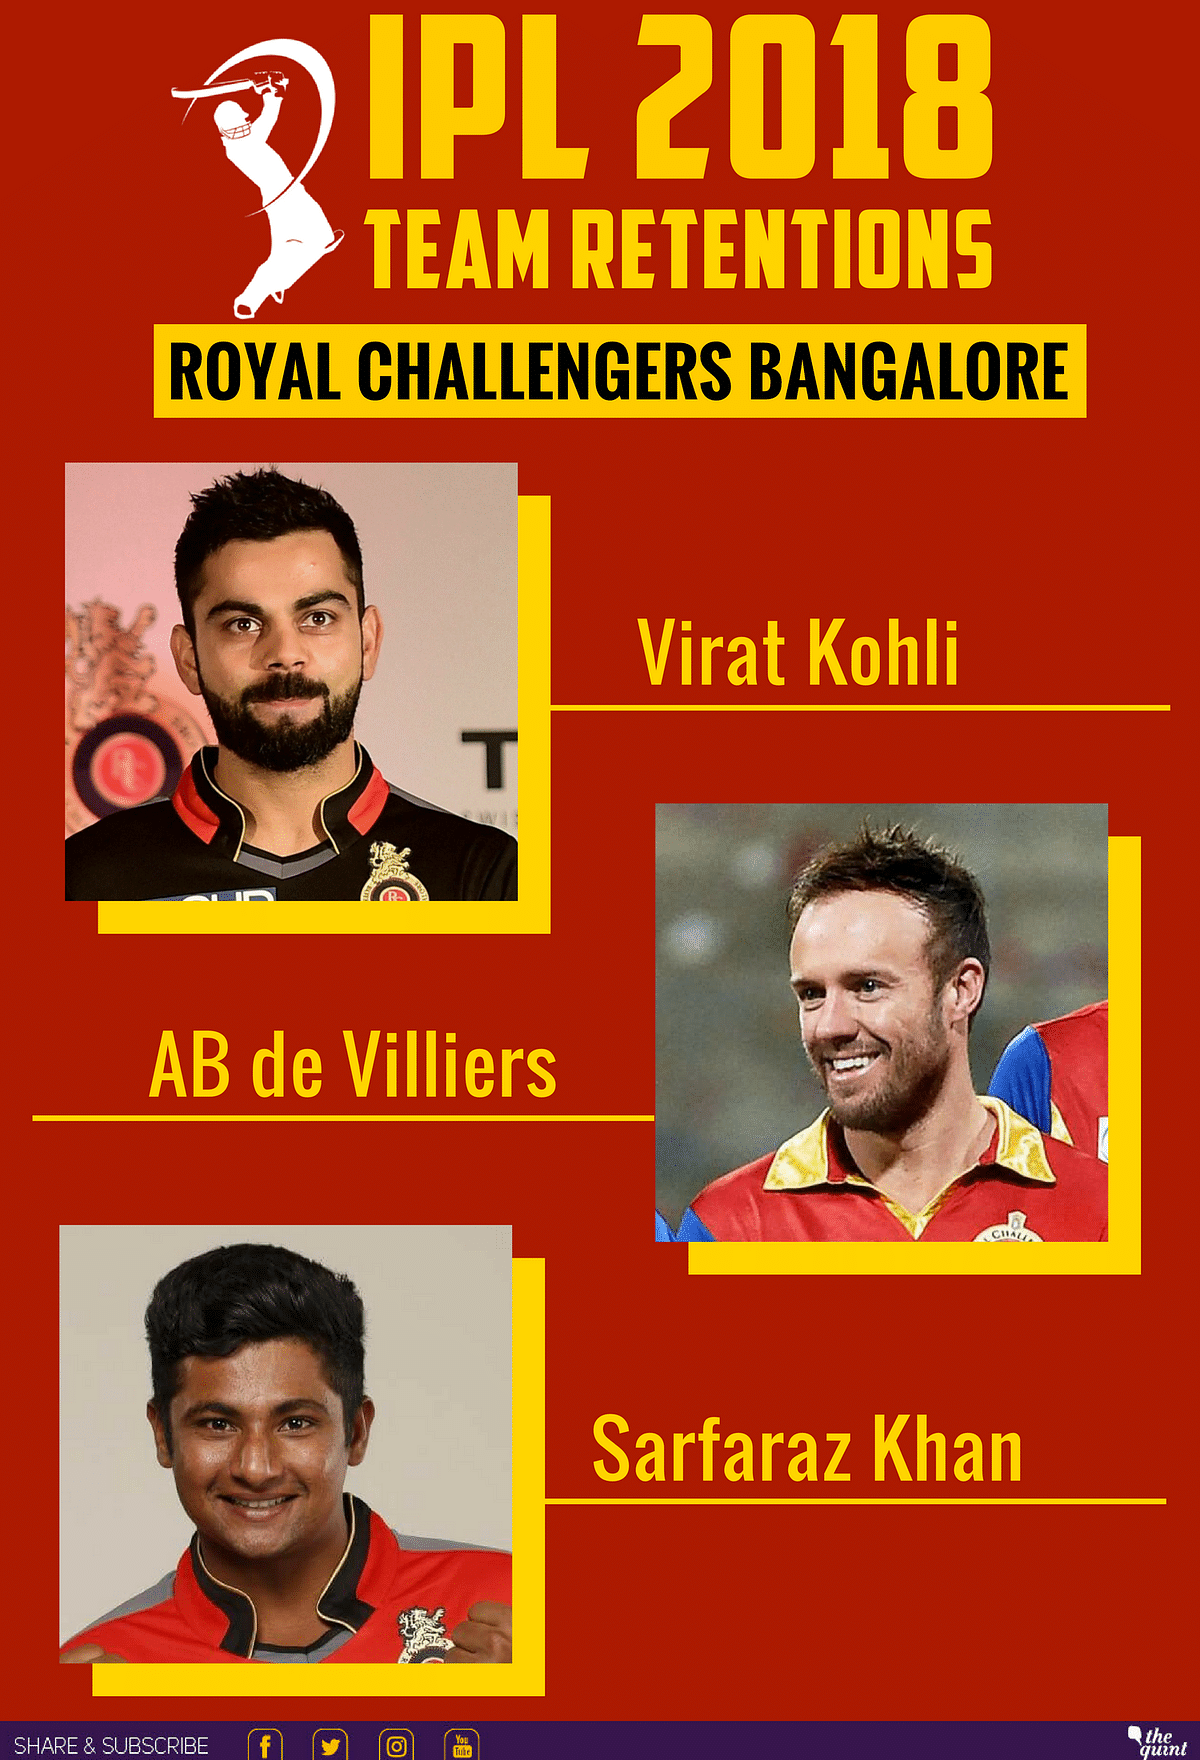 Here’s a look at the players retained by the Royal Challengers Bangalore.